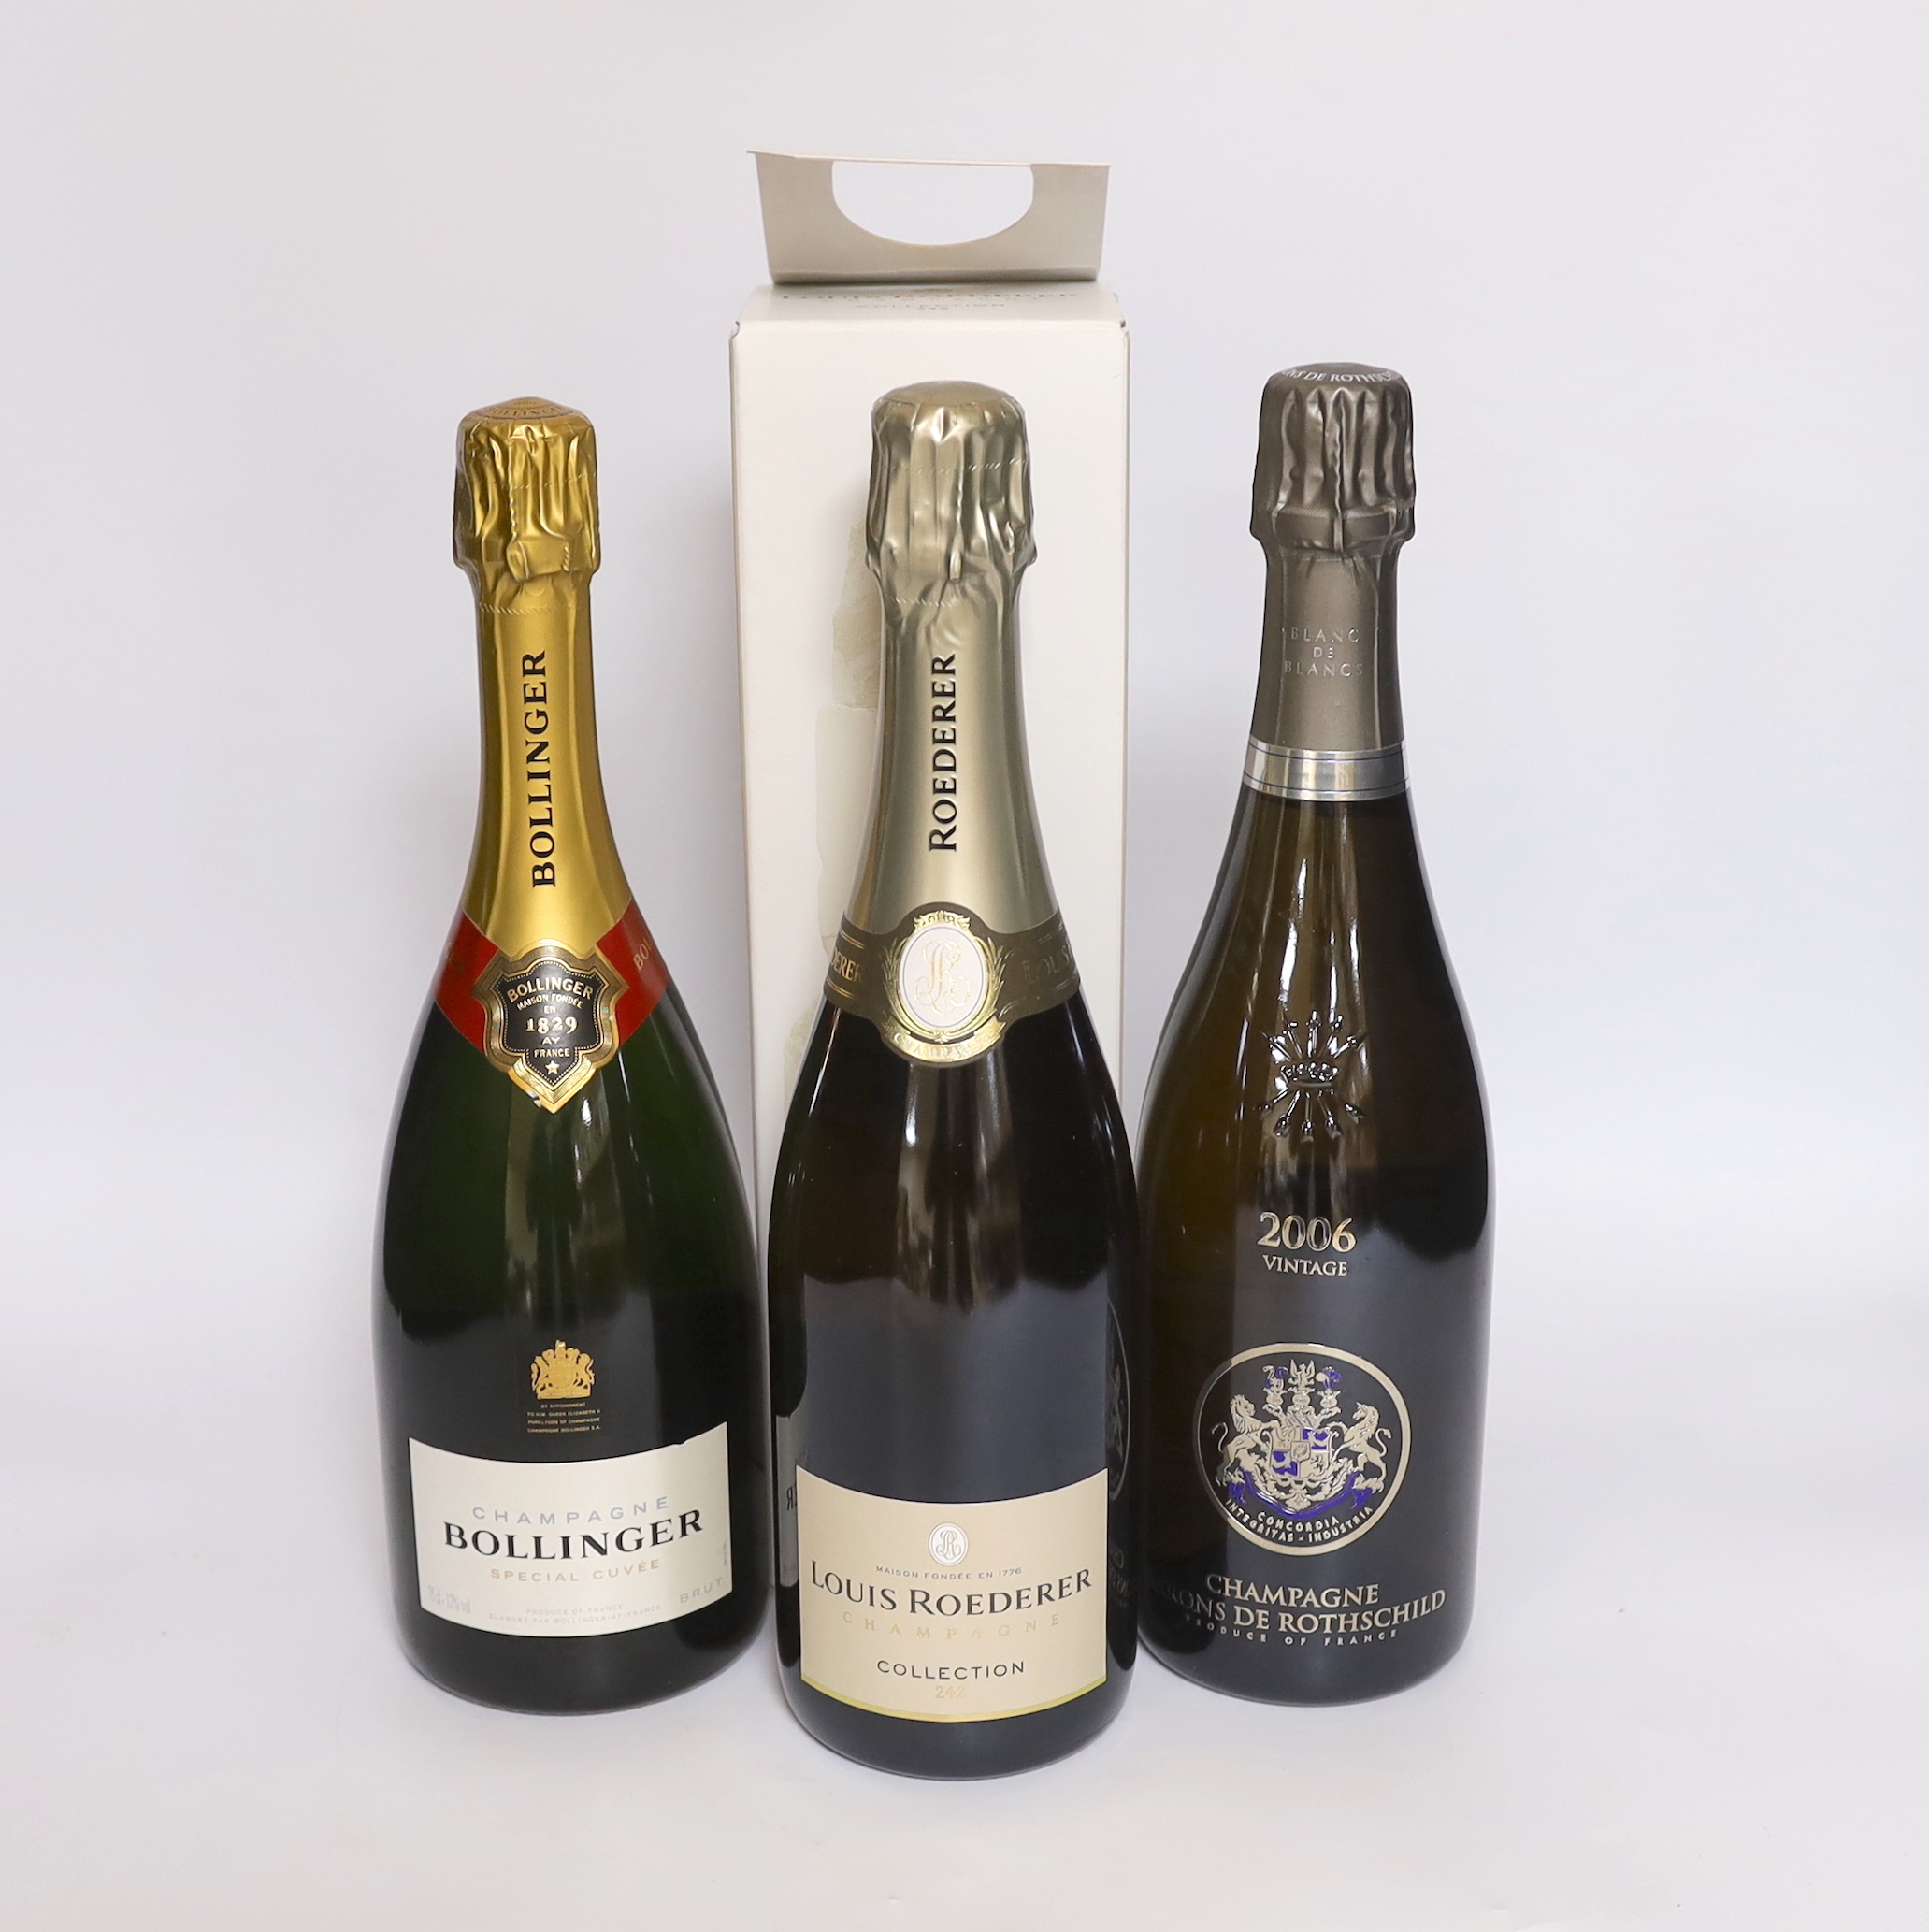 Three bottles of champagne - a bottle of Bollinger special cuvée, a bottle of champagne barons de Rothschild 2006 and a cased bottle of Louis Roederer collection 242                                                       